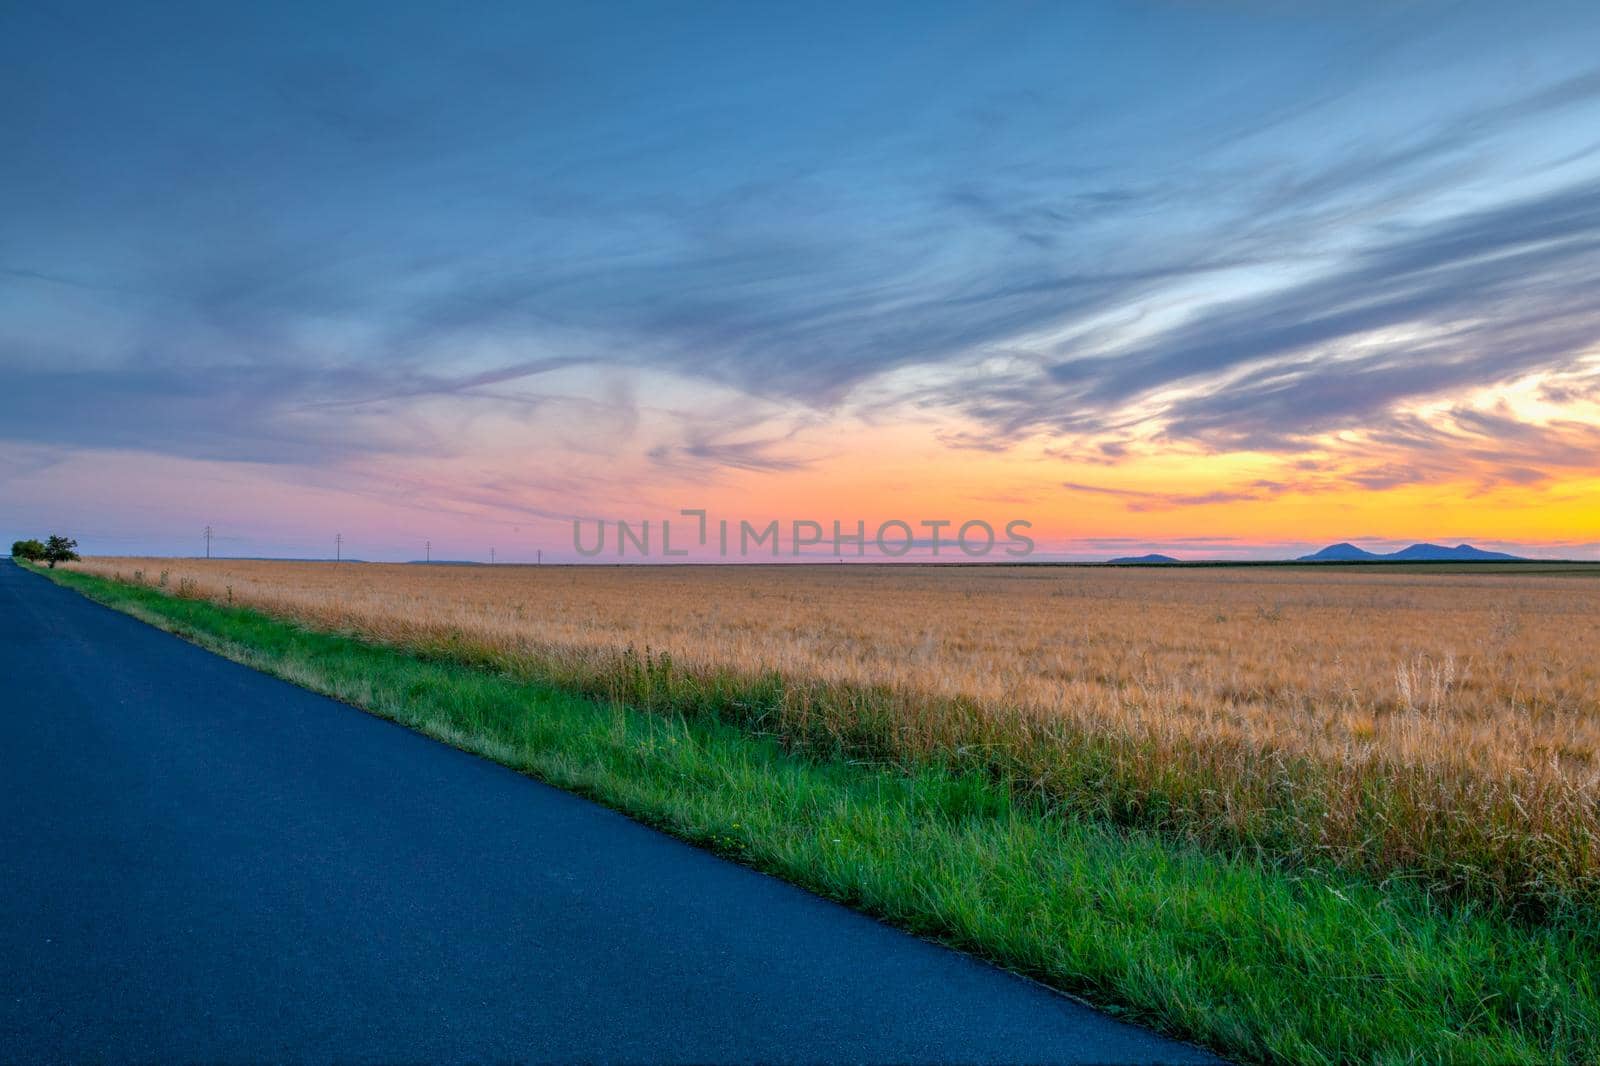 Barley field and amazing sunset in Czech Bohemian Upland, Czech Republic.  Uplands are a nature reserve.